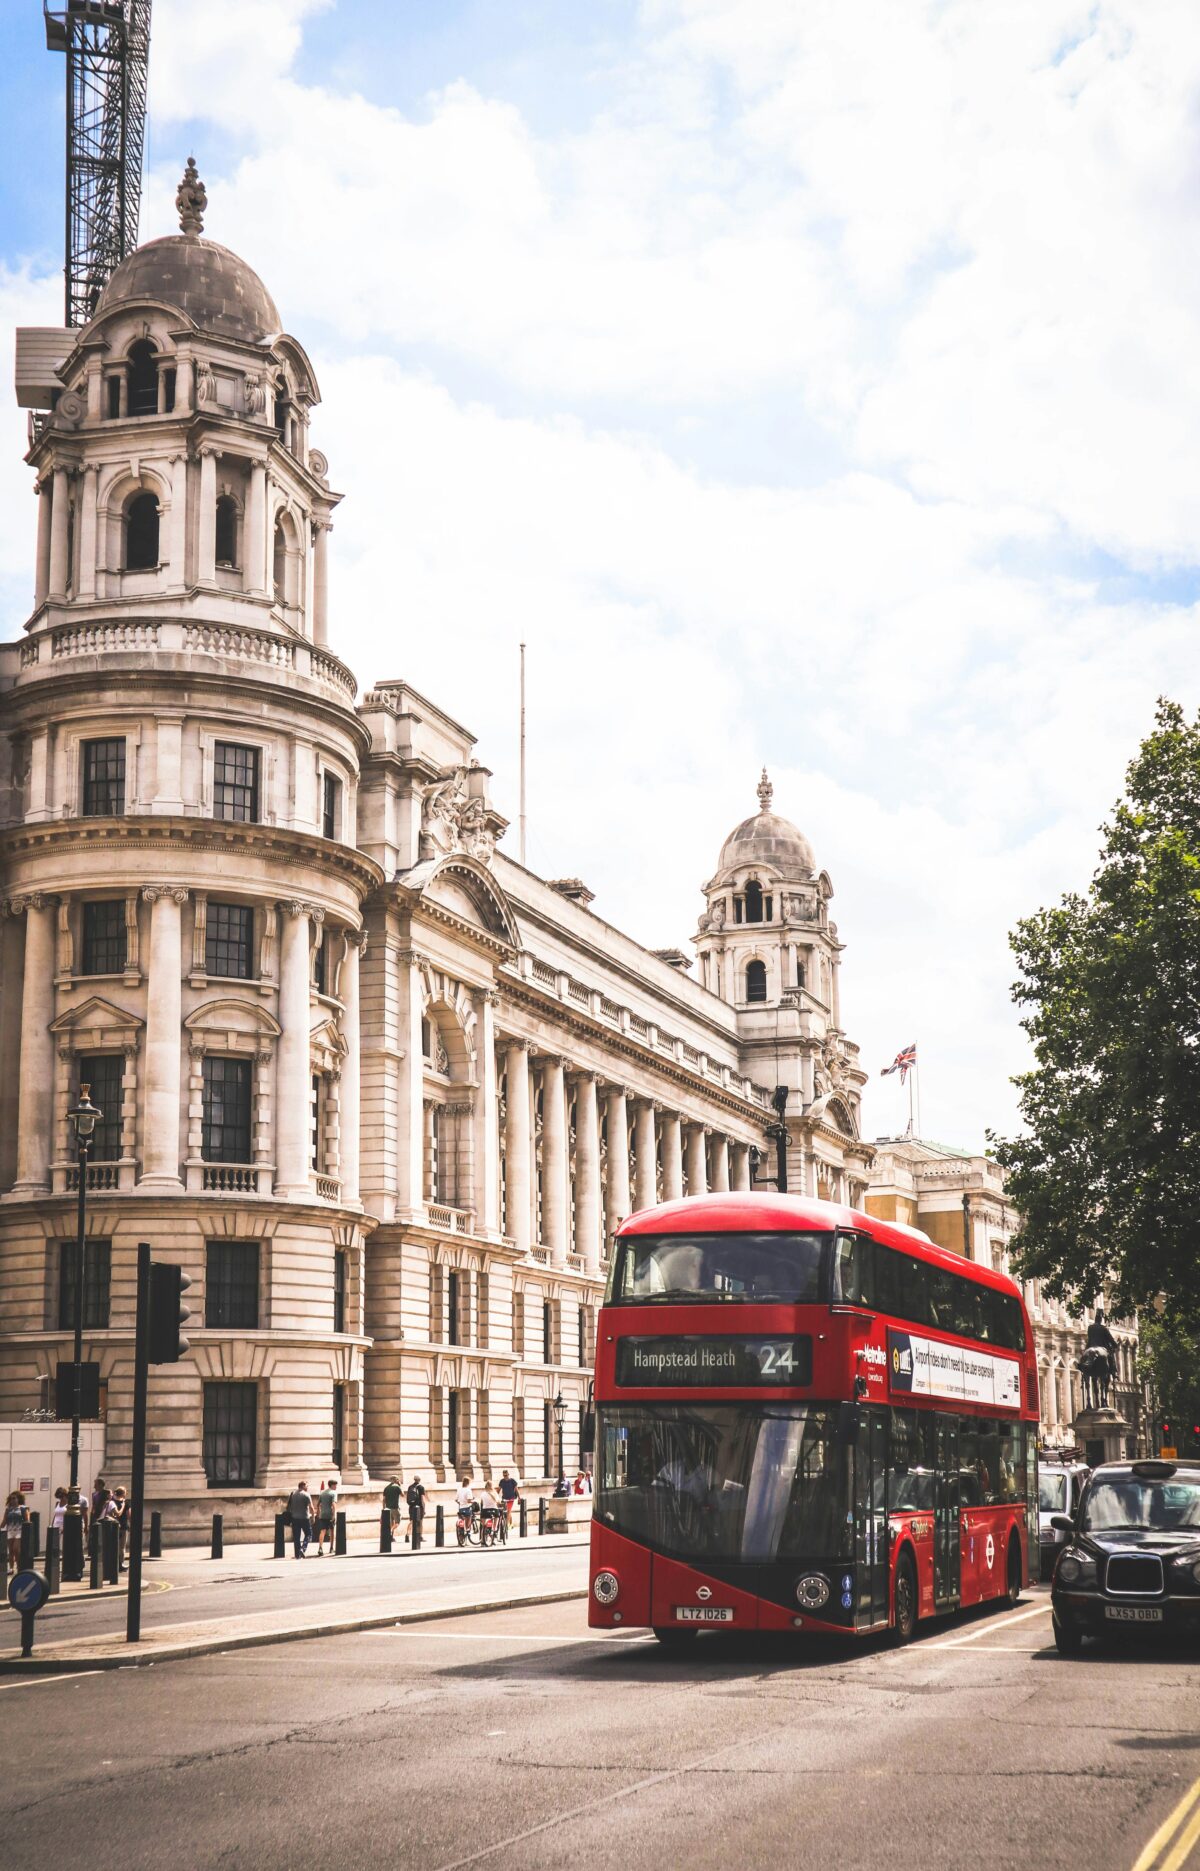 CCTV camera on buses and coaches in London and across cities in the United Kingdom